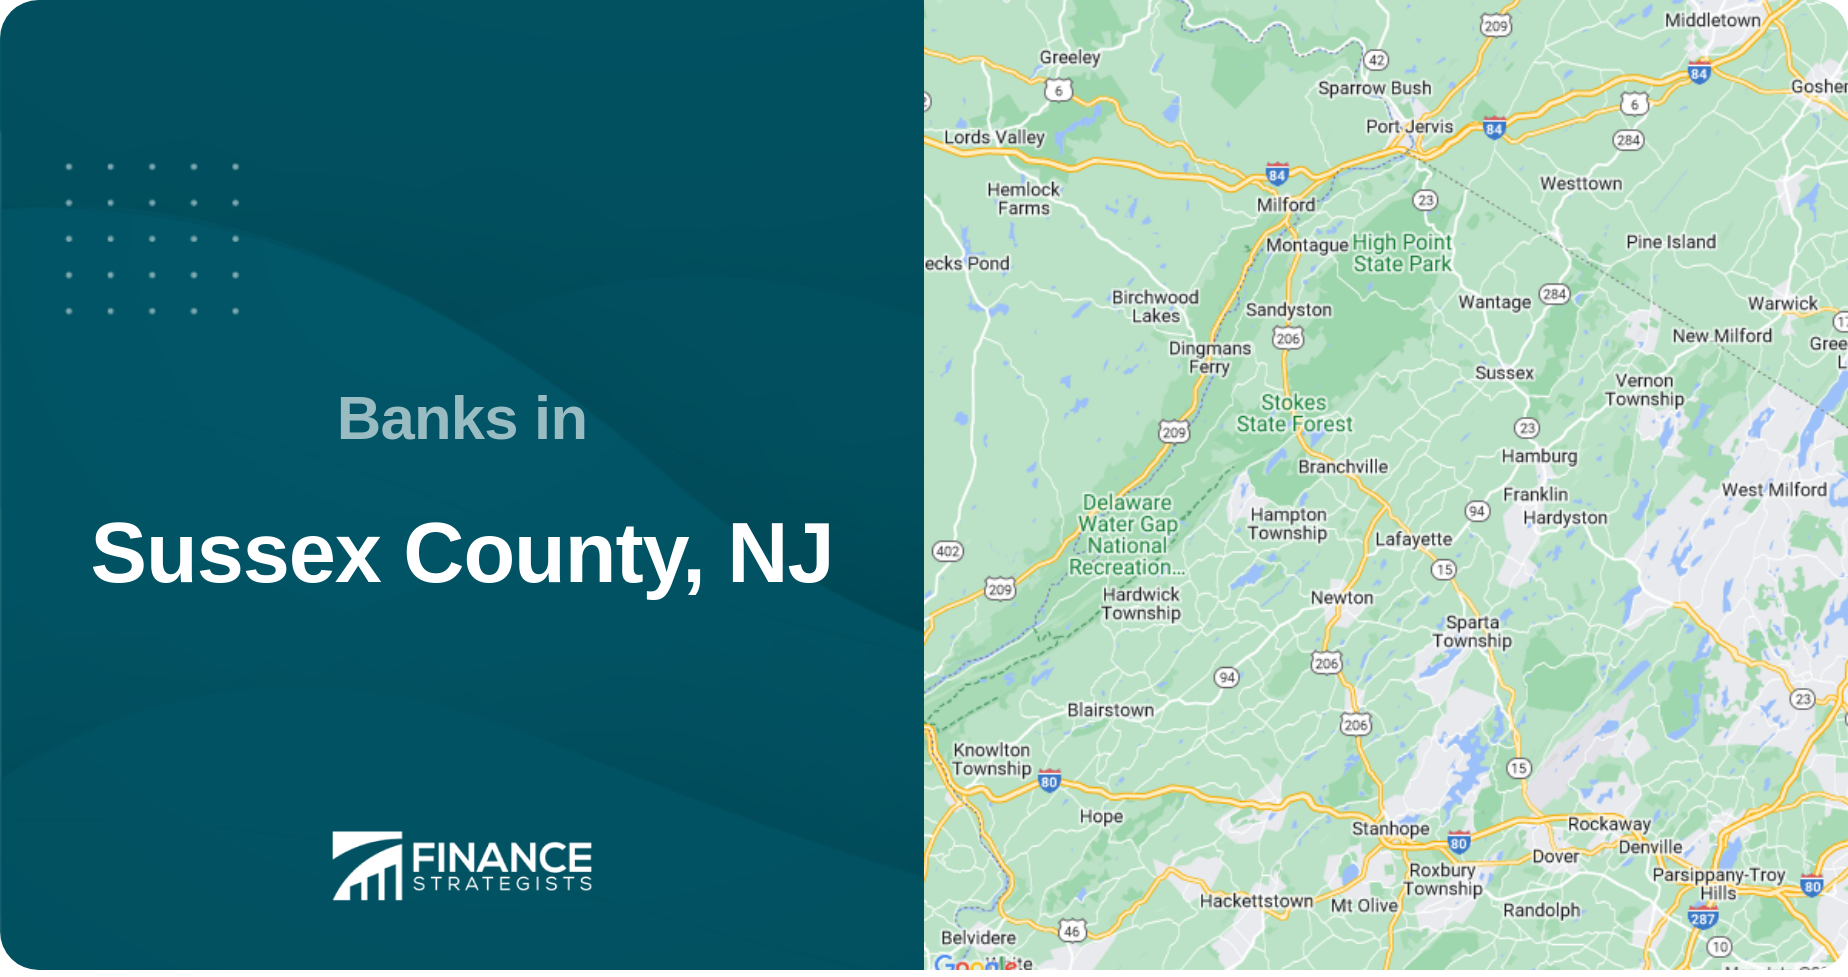 Banks in Sussex County, NJ